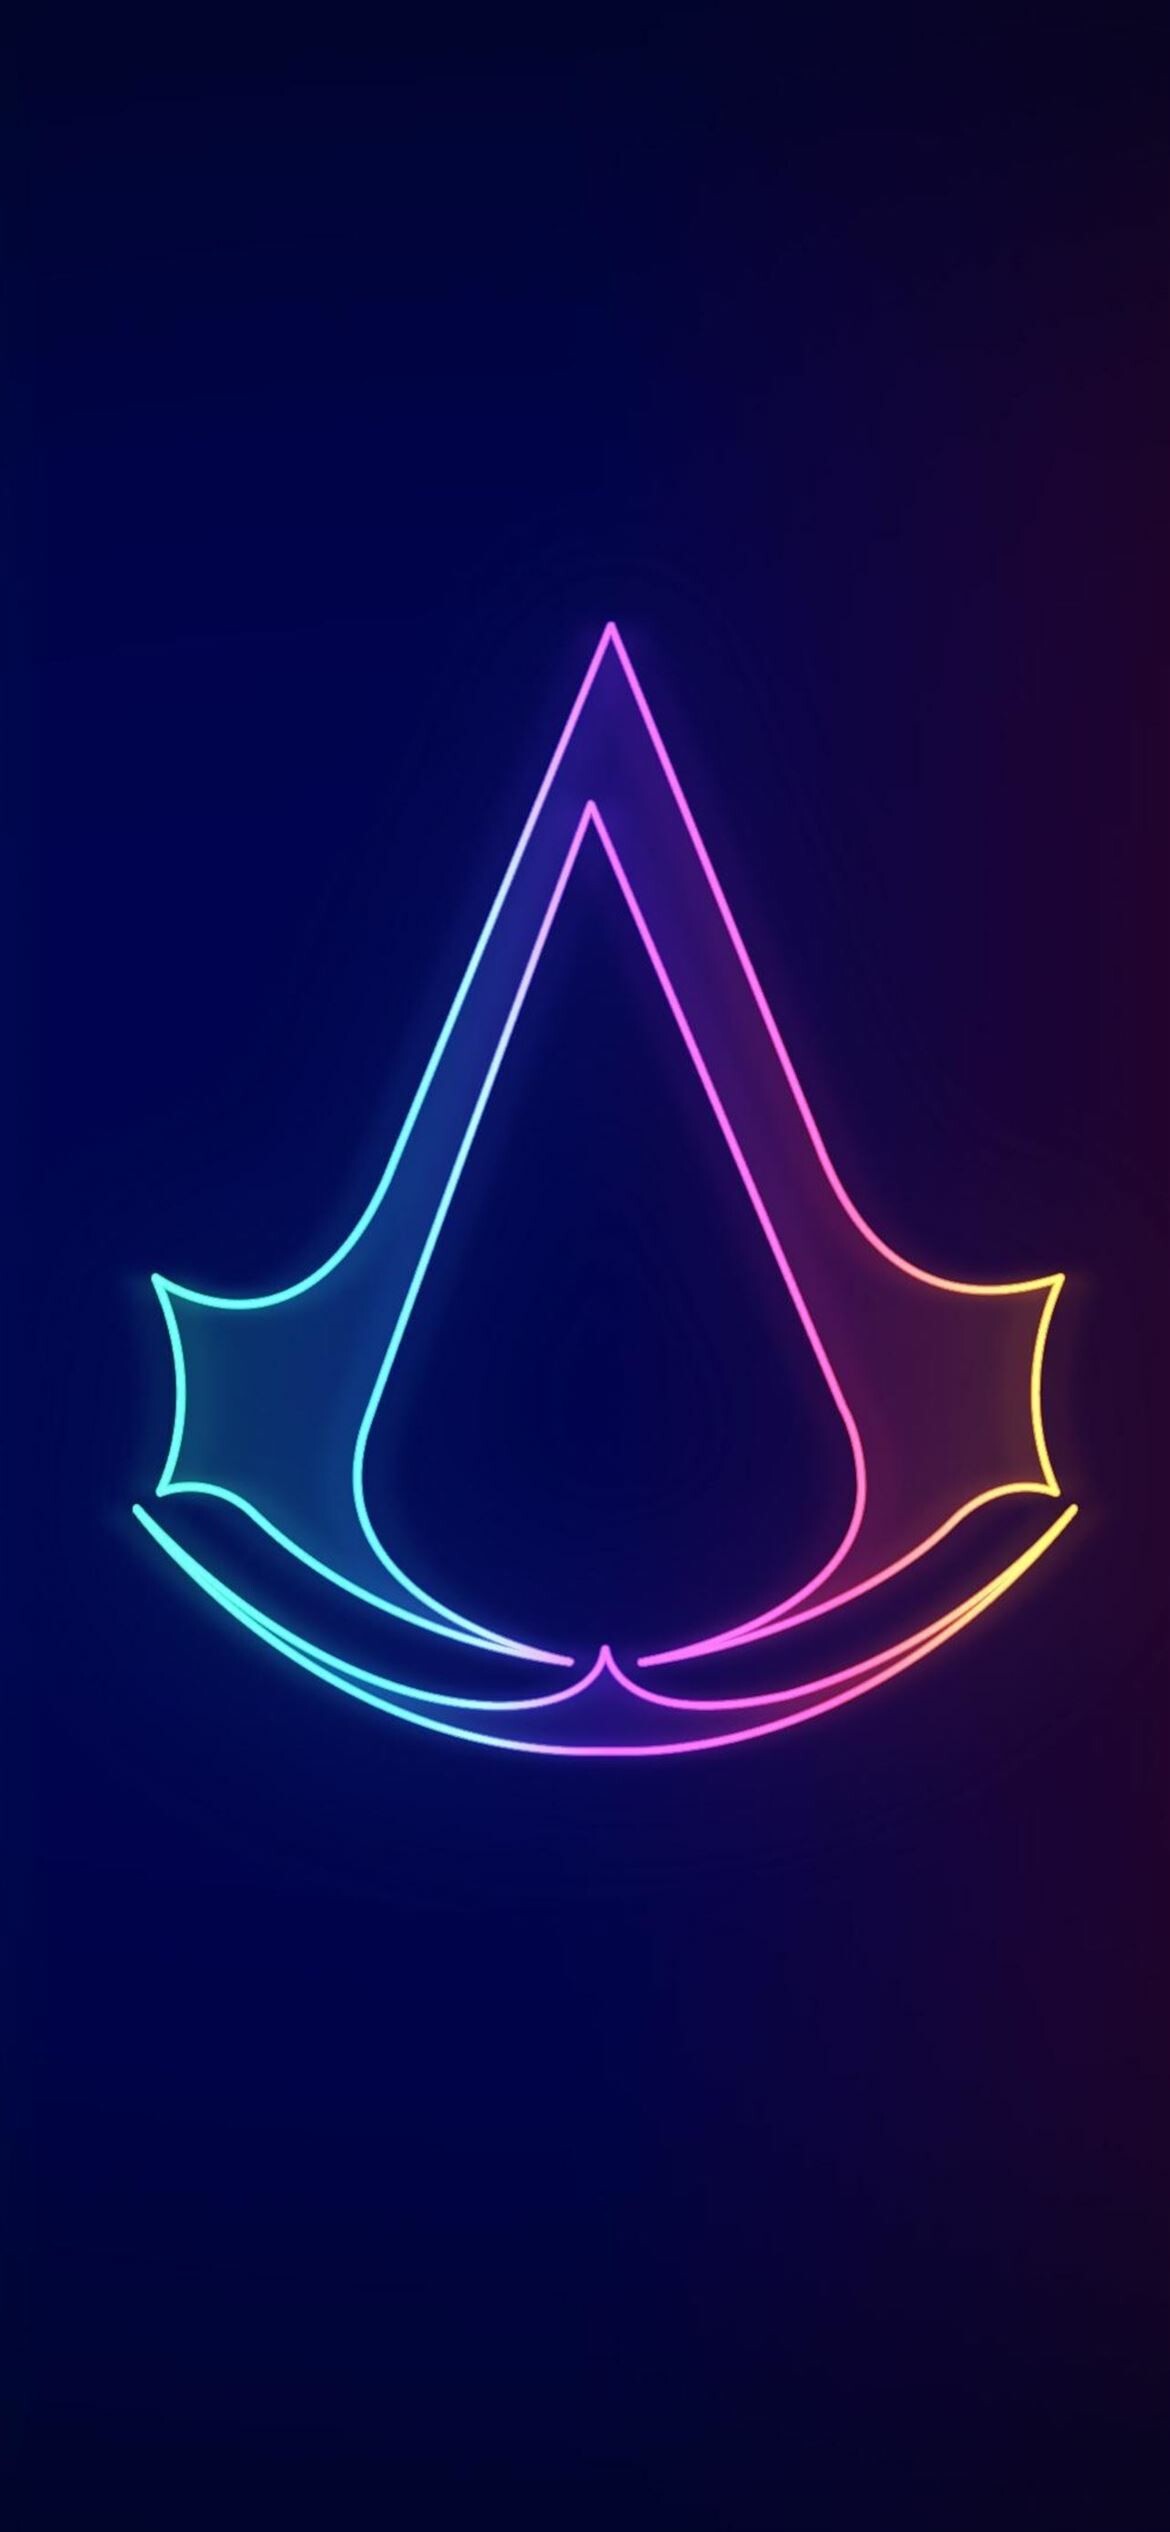 Neon: Creates a strong visual effect by using bright colors. 1170x2540 HD Background.